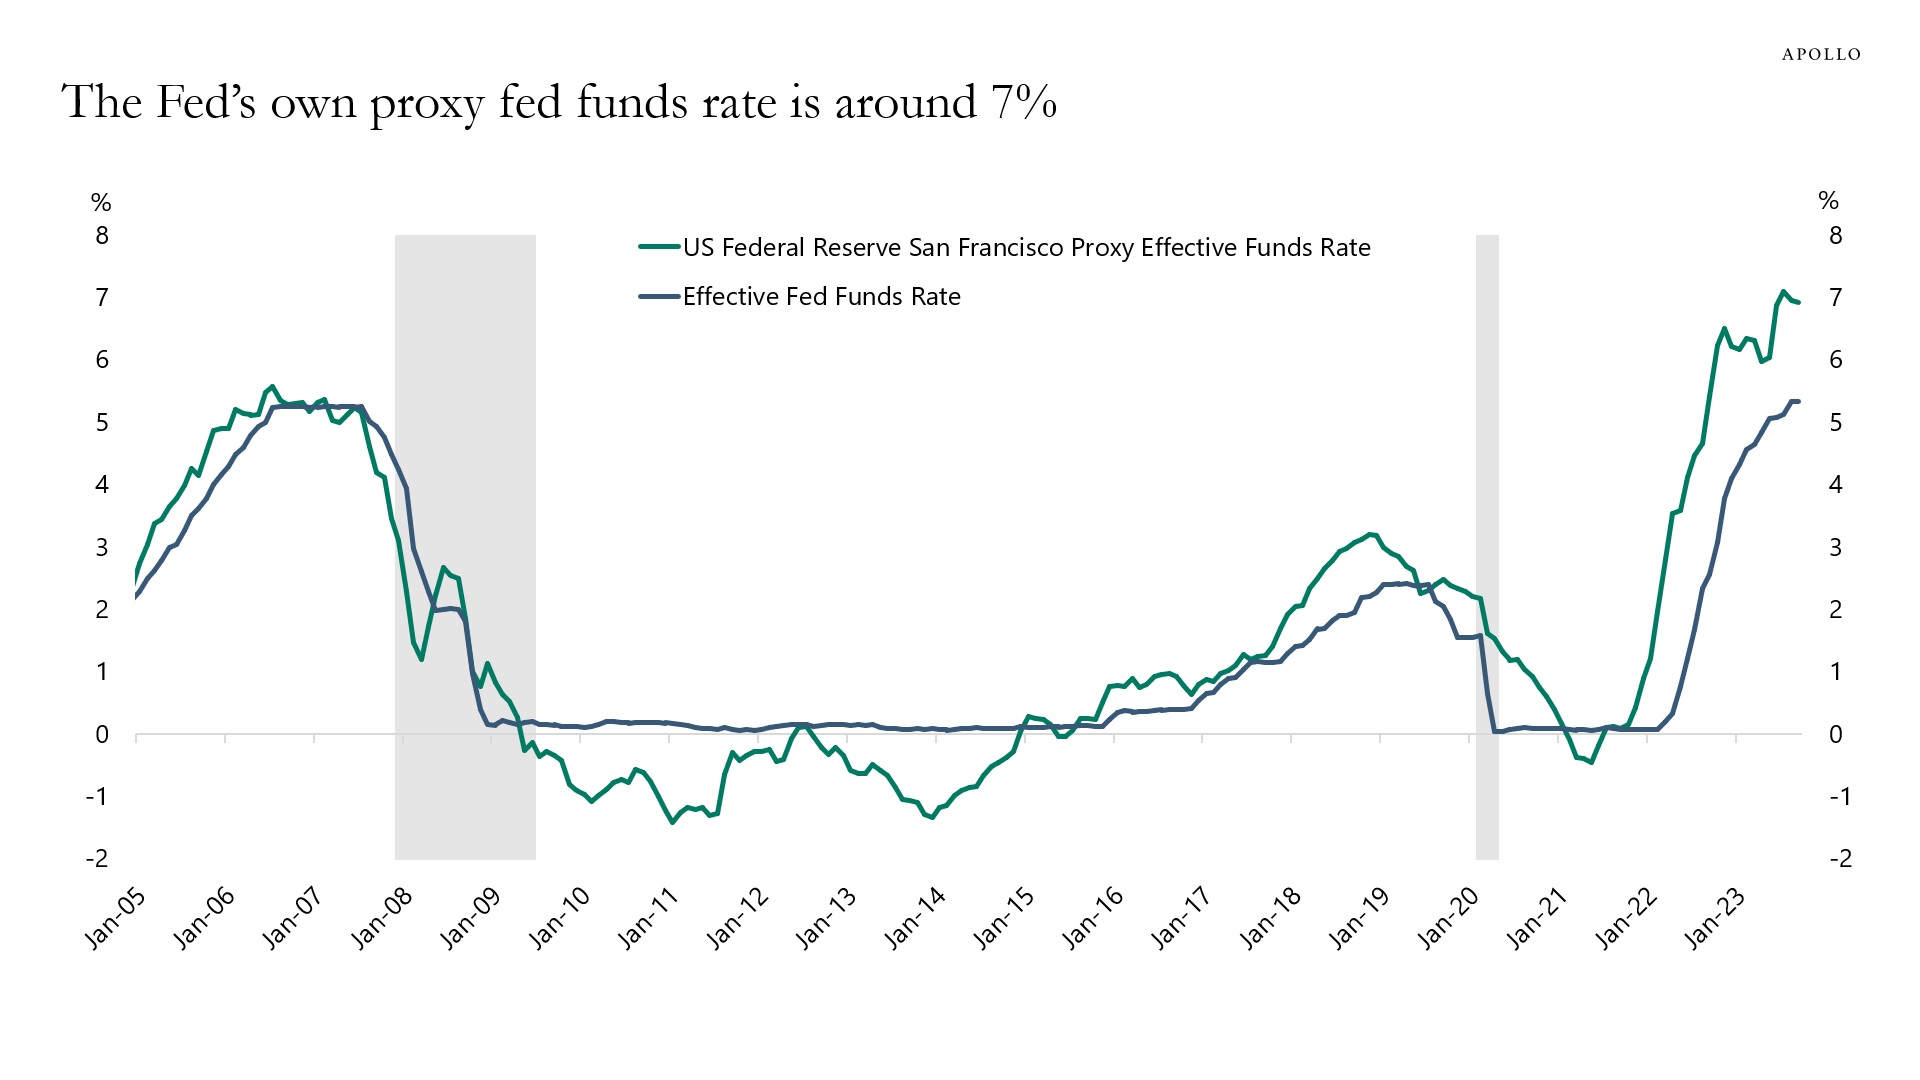 The Fed's own proxy rate is approximately 7%